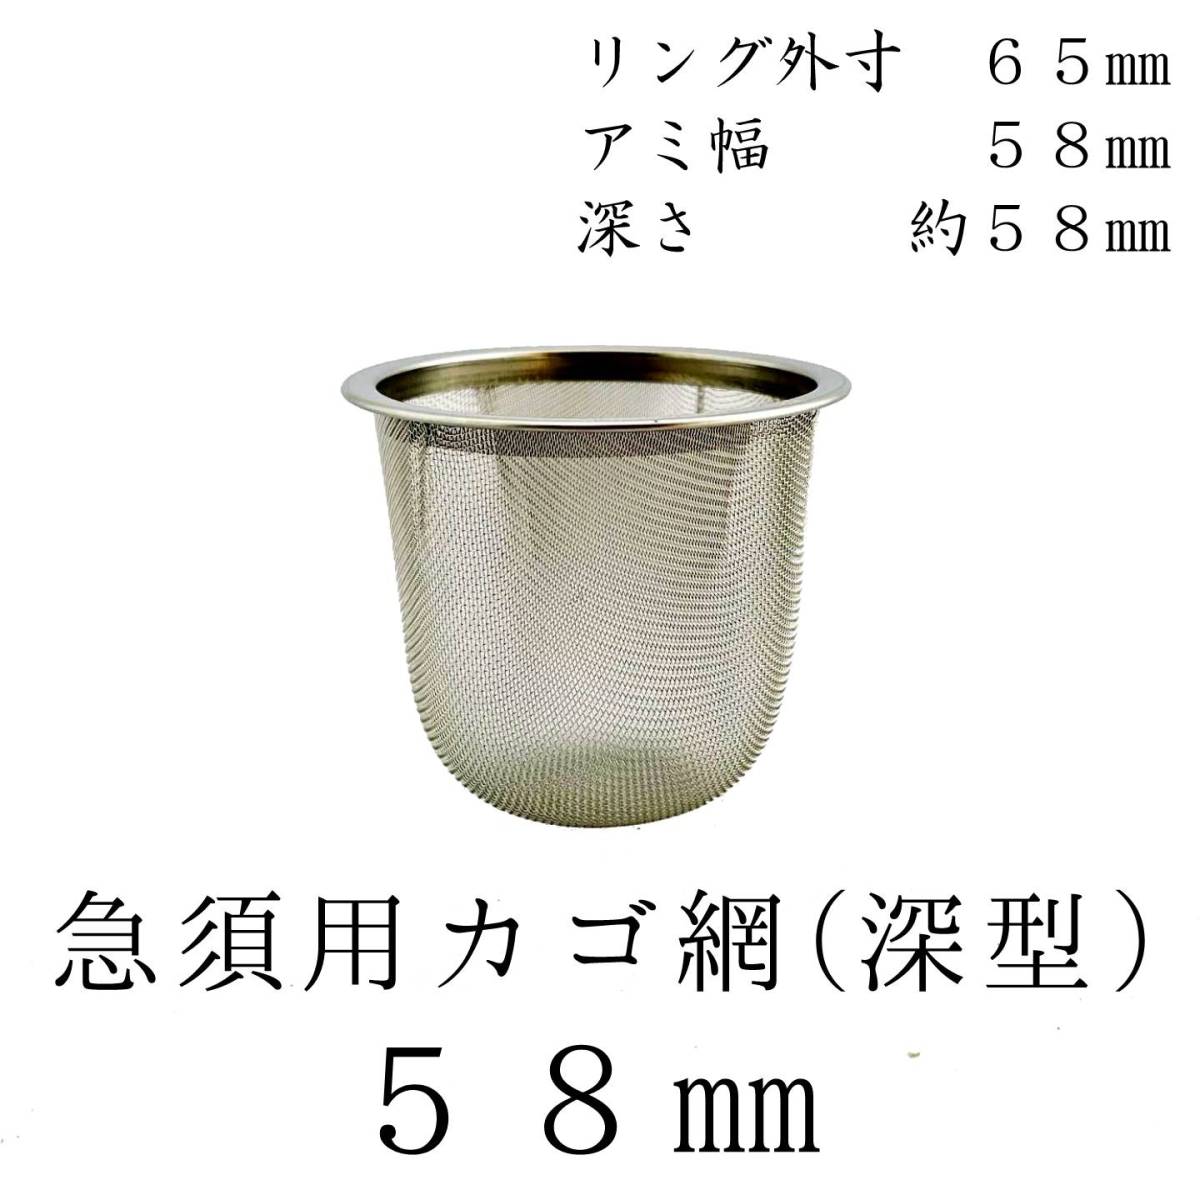  tea strainer deep type small teapot for basket net 58mm stainless steel tea .. all sorts size equipped for exchange sieve net tea utensils domestic production 